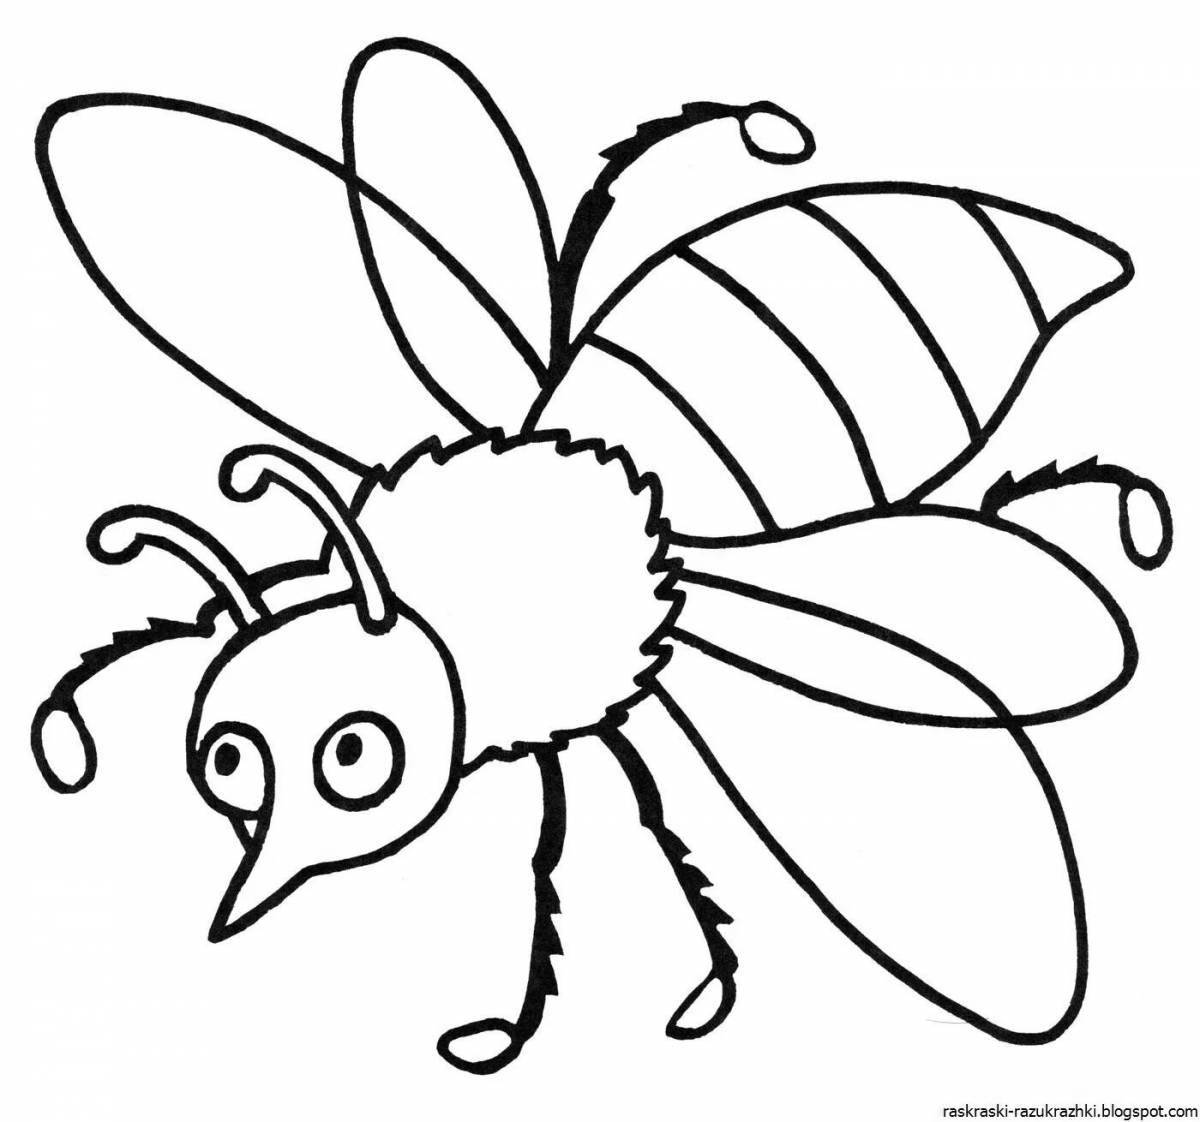 Fun coloring pages of insects for children 6-7 years old